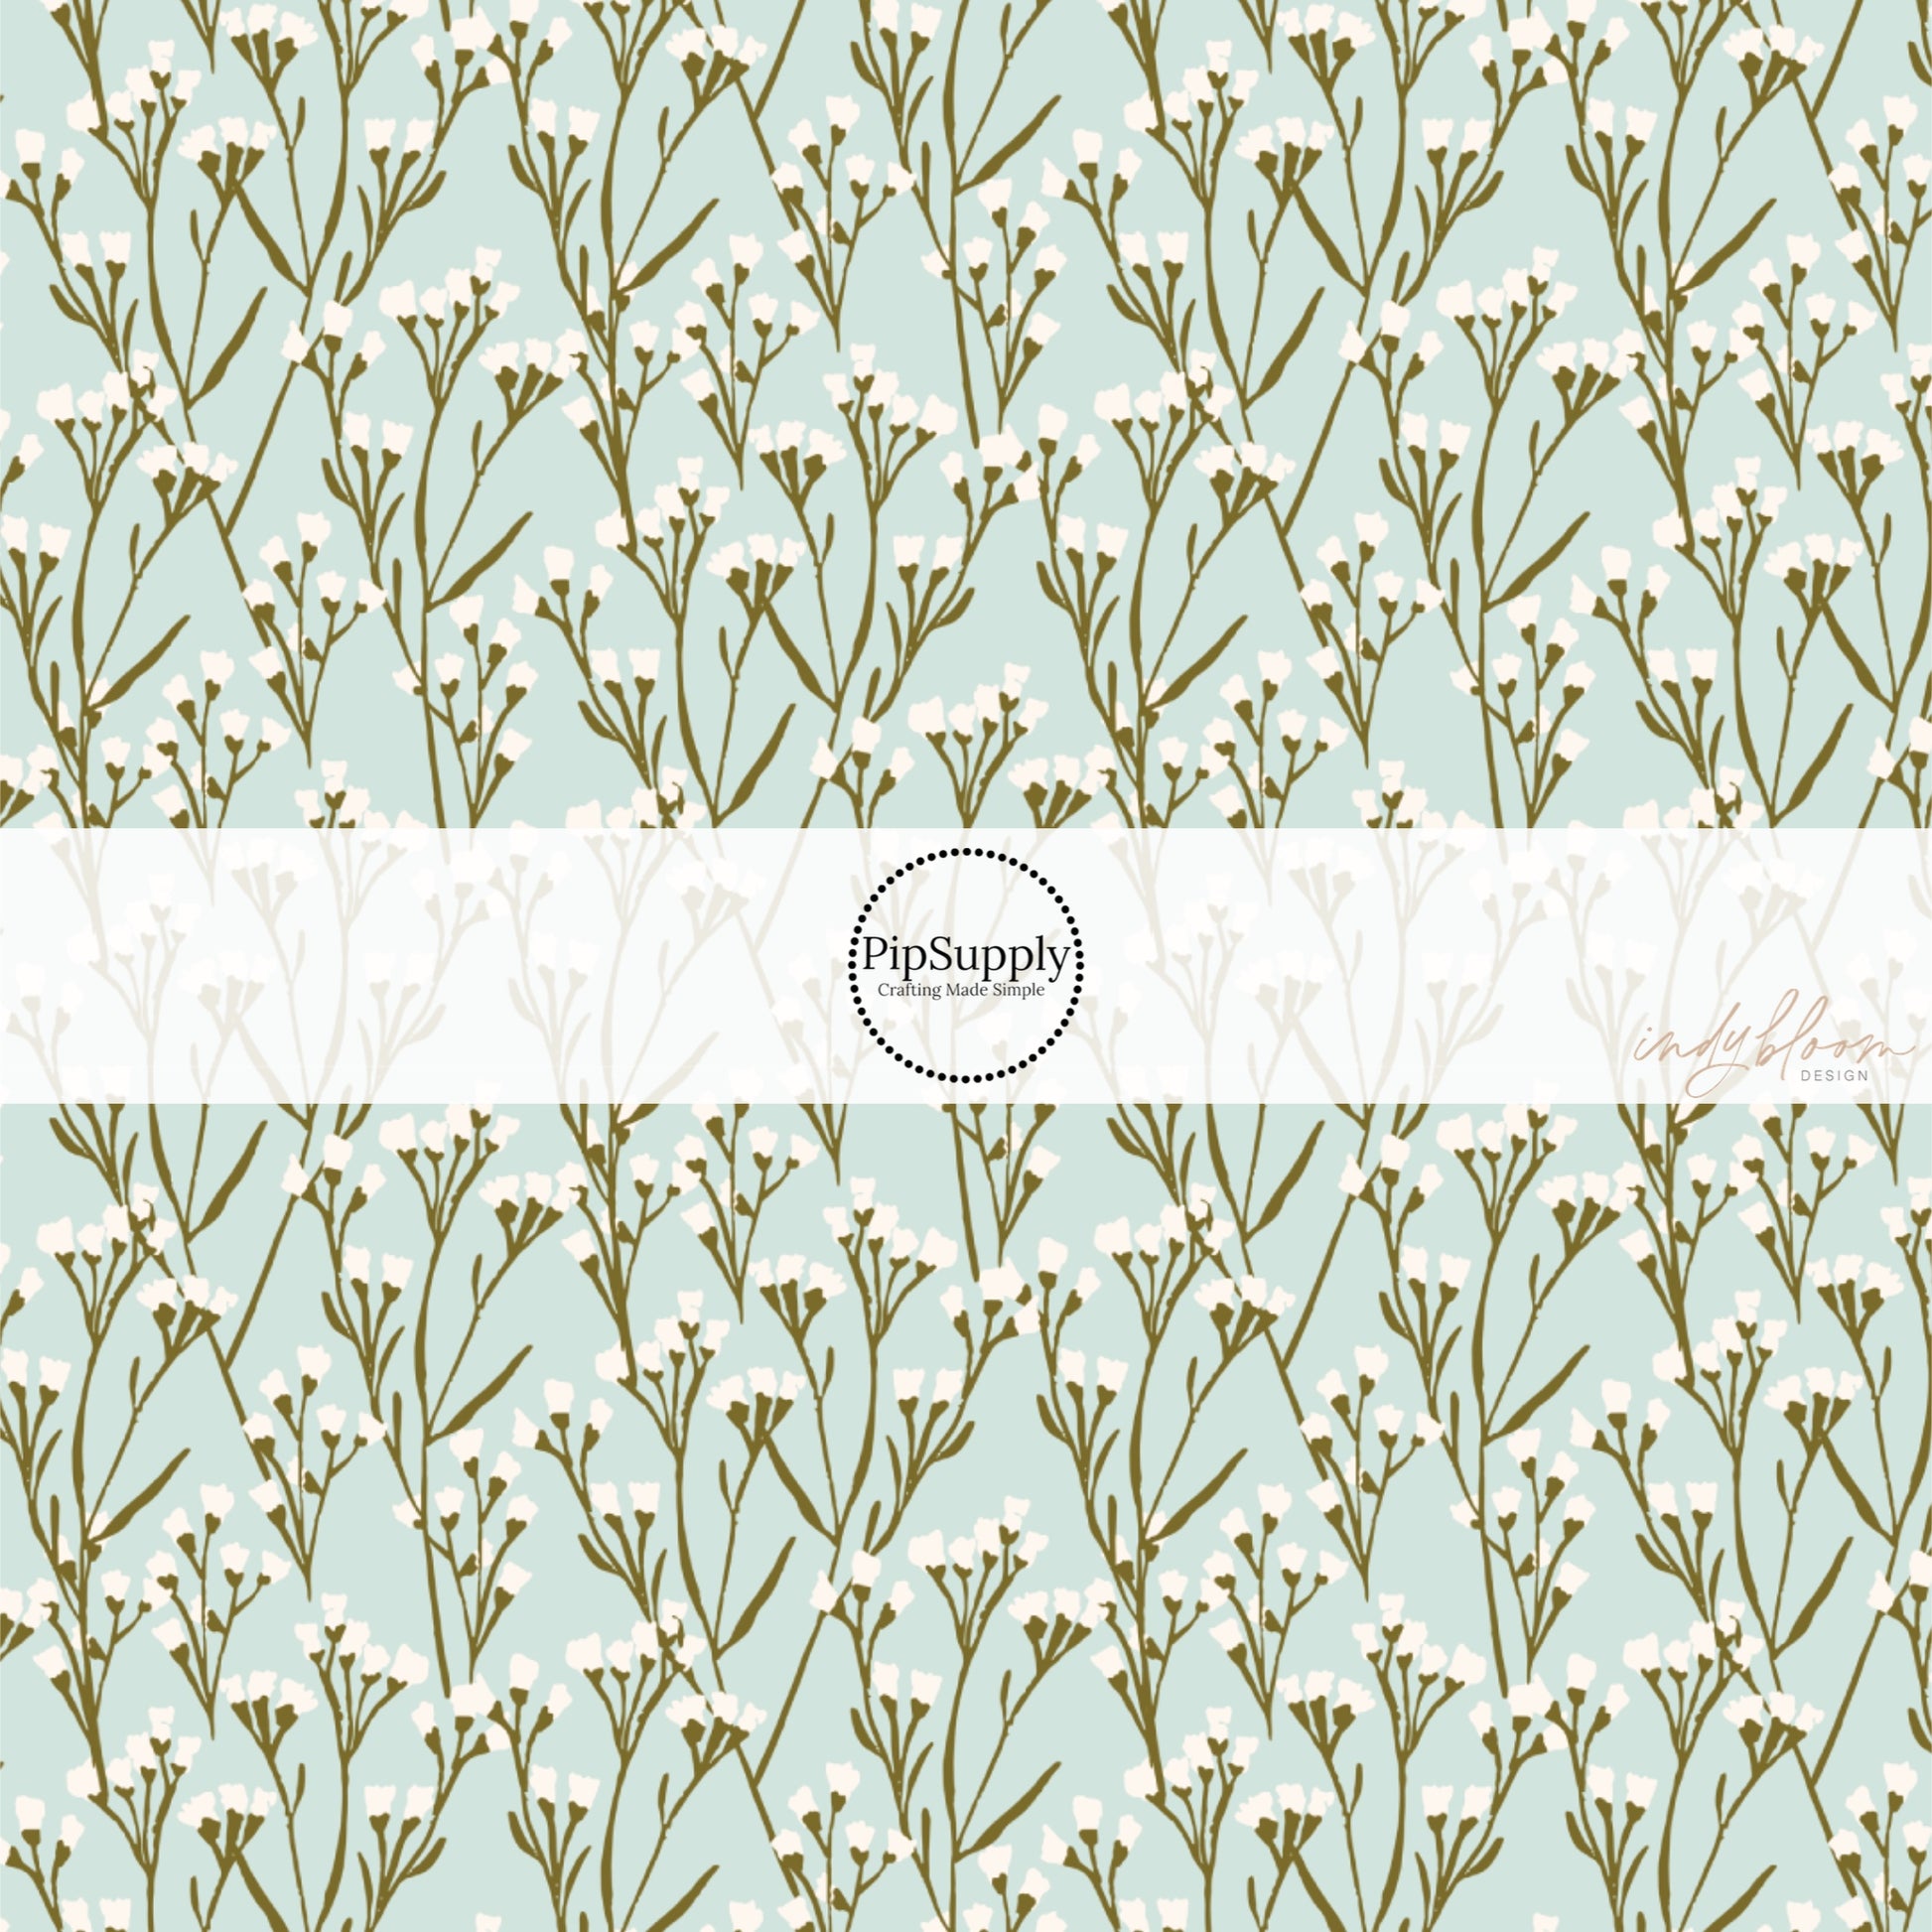 This summer fabric by the yard features cream wildflowers on light blue. This fun summer themed fabric can be used for all your sewing and crafting needs!